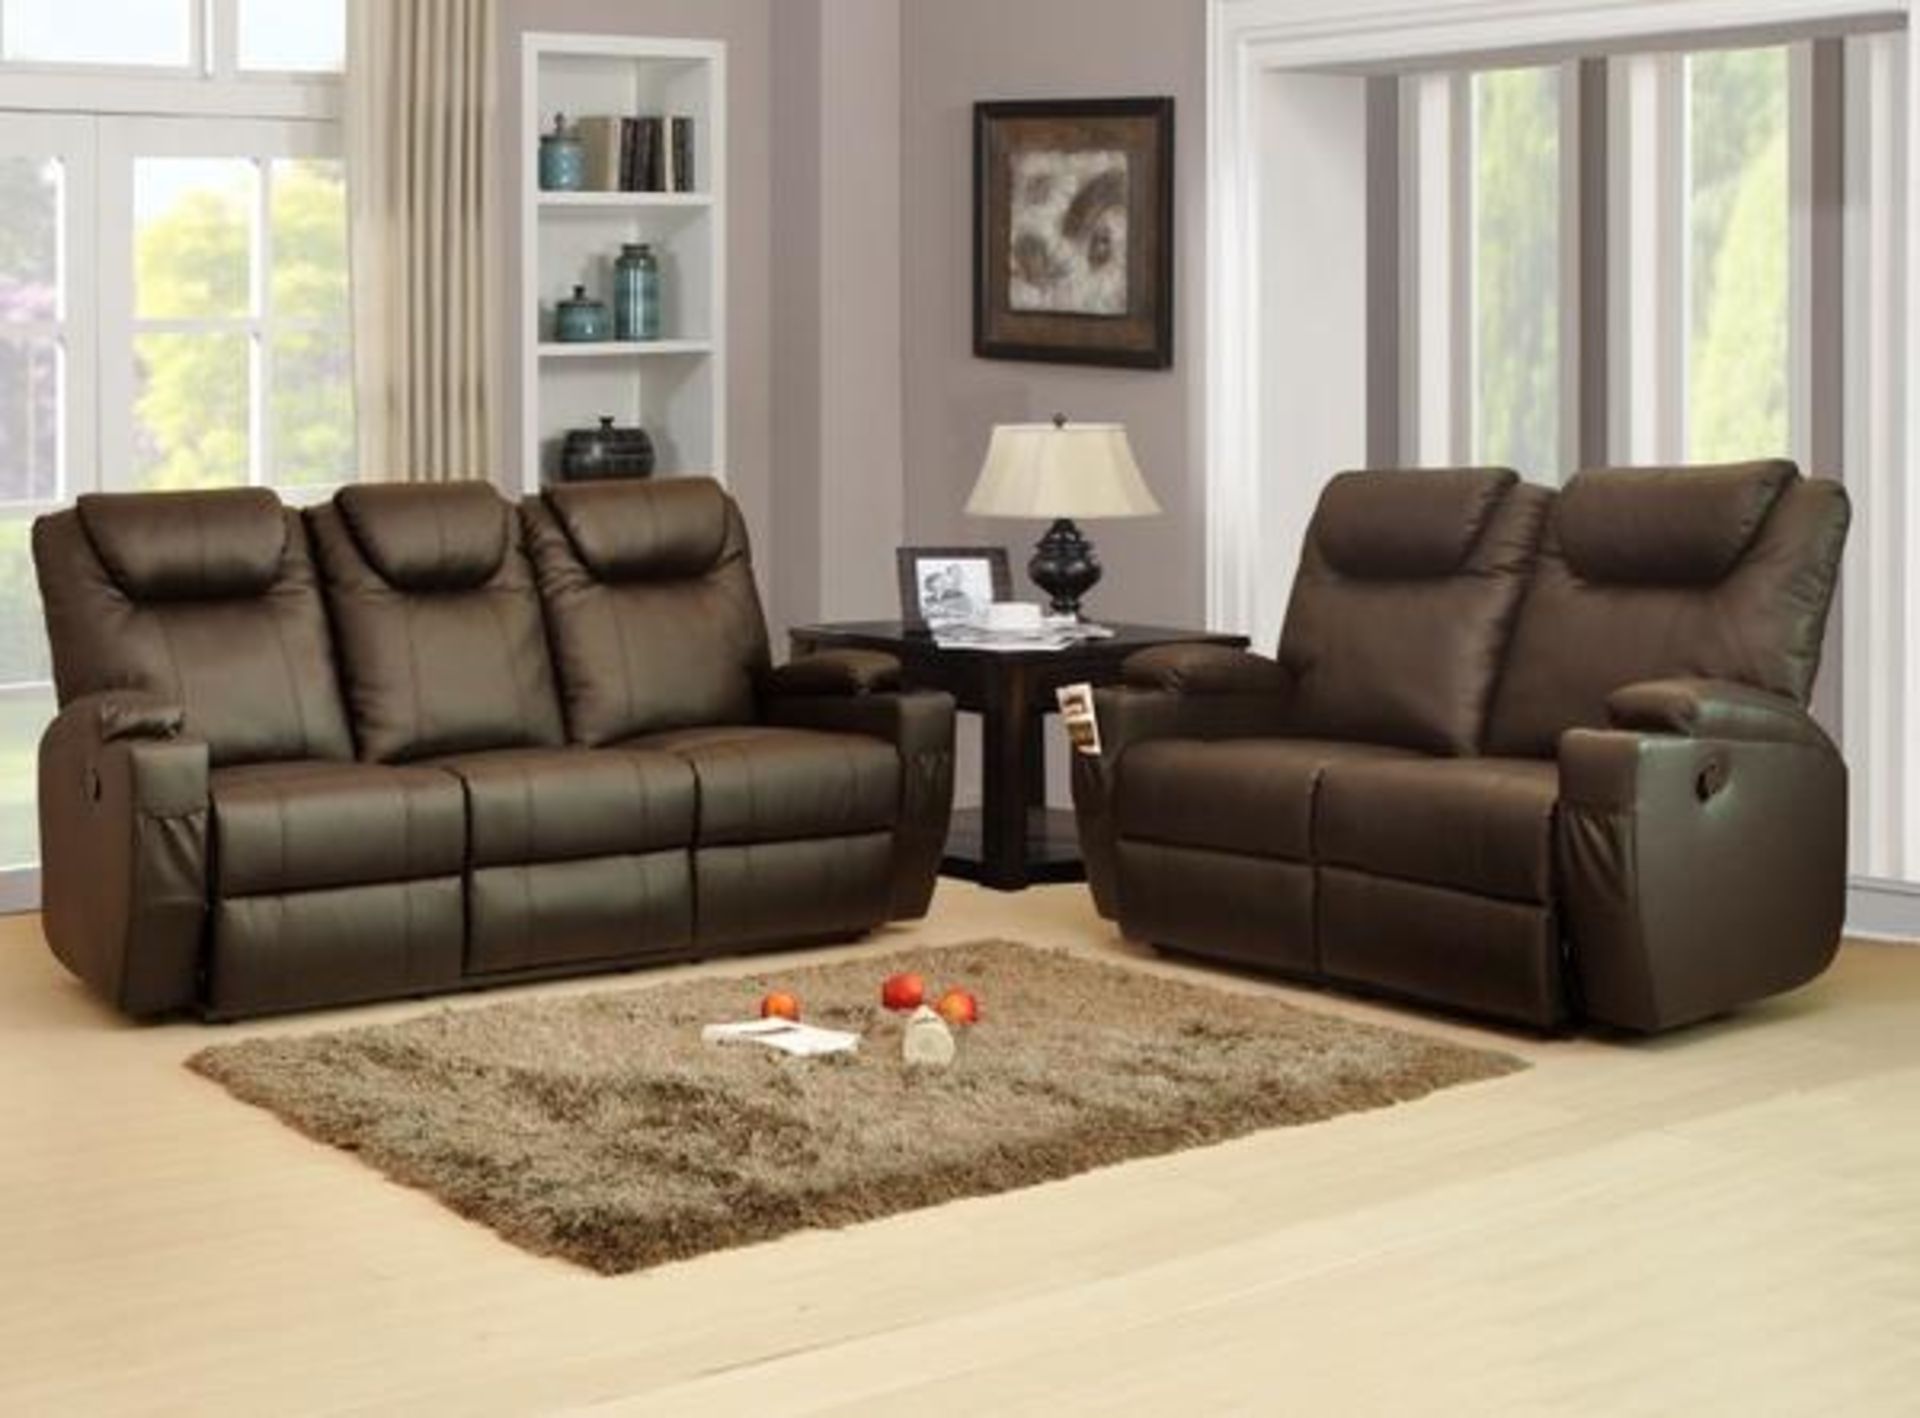 Brand New Boxed 3 Seater Plus 2 Seater Lazyboy Brown Leather Manual Reclining Sofas - Image 2 of 2